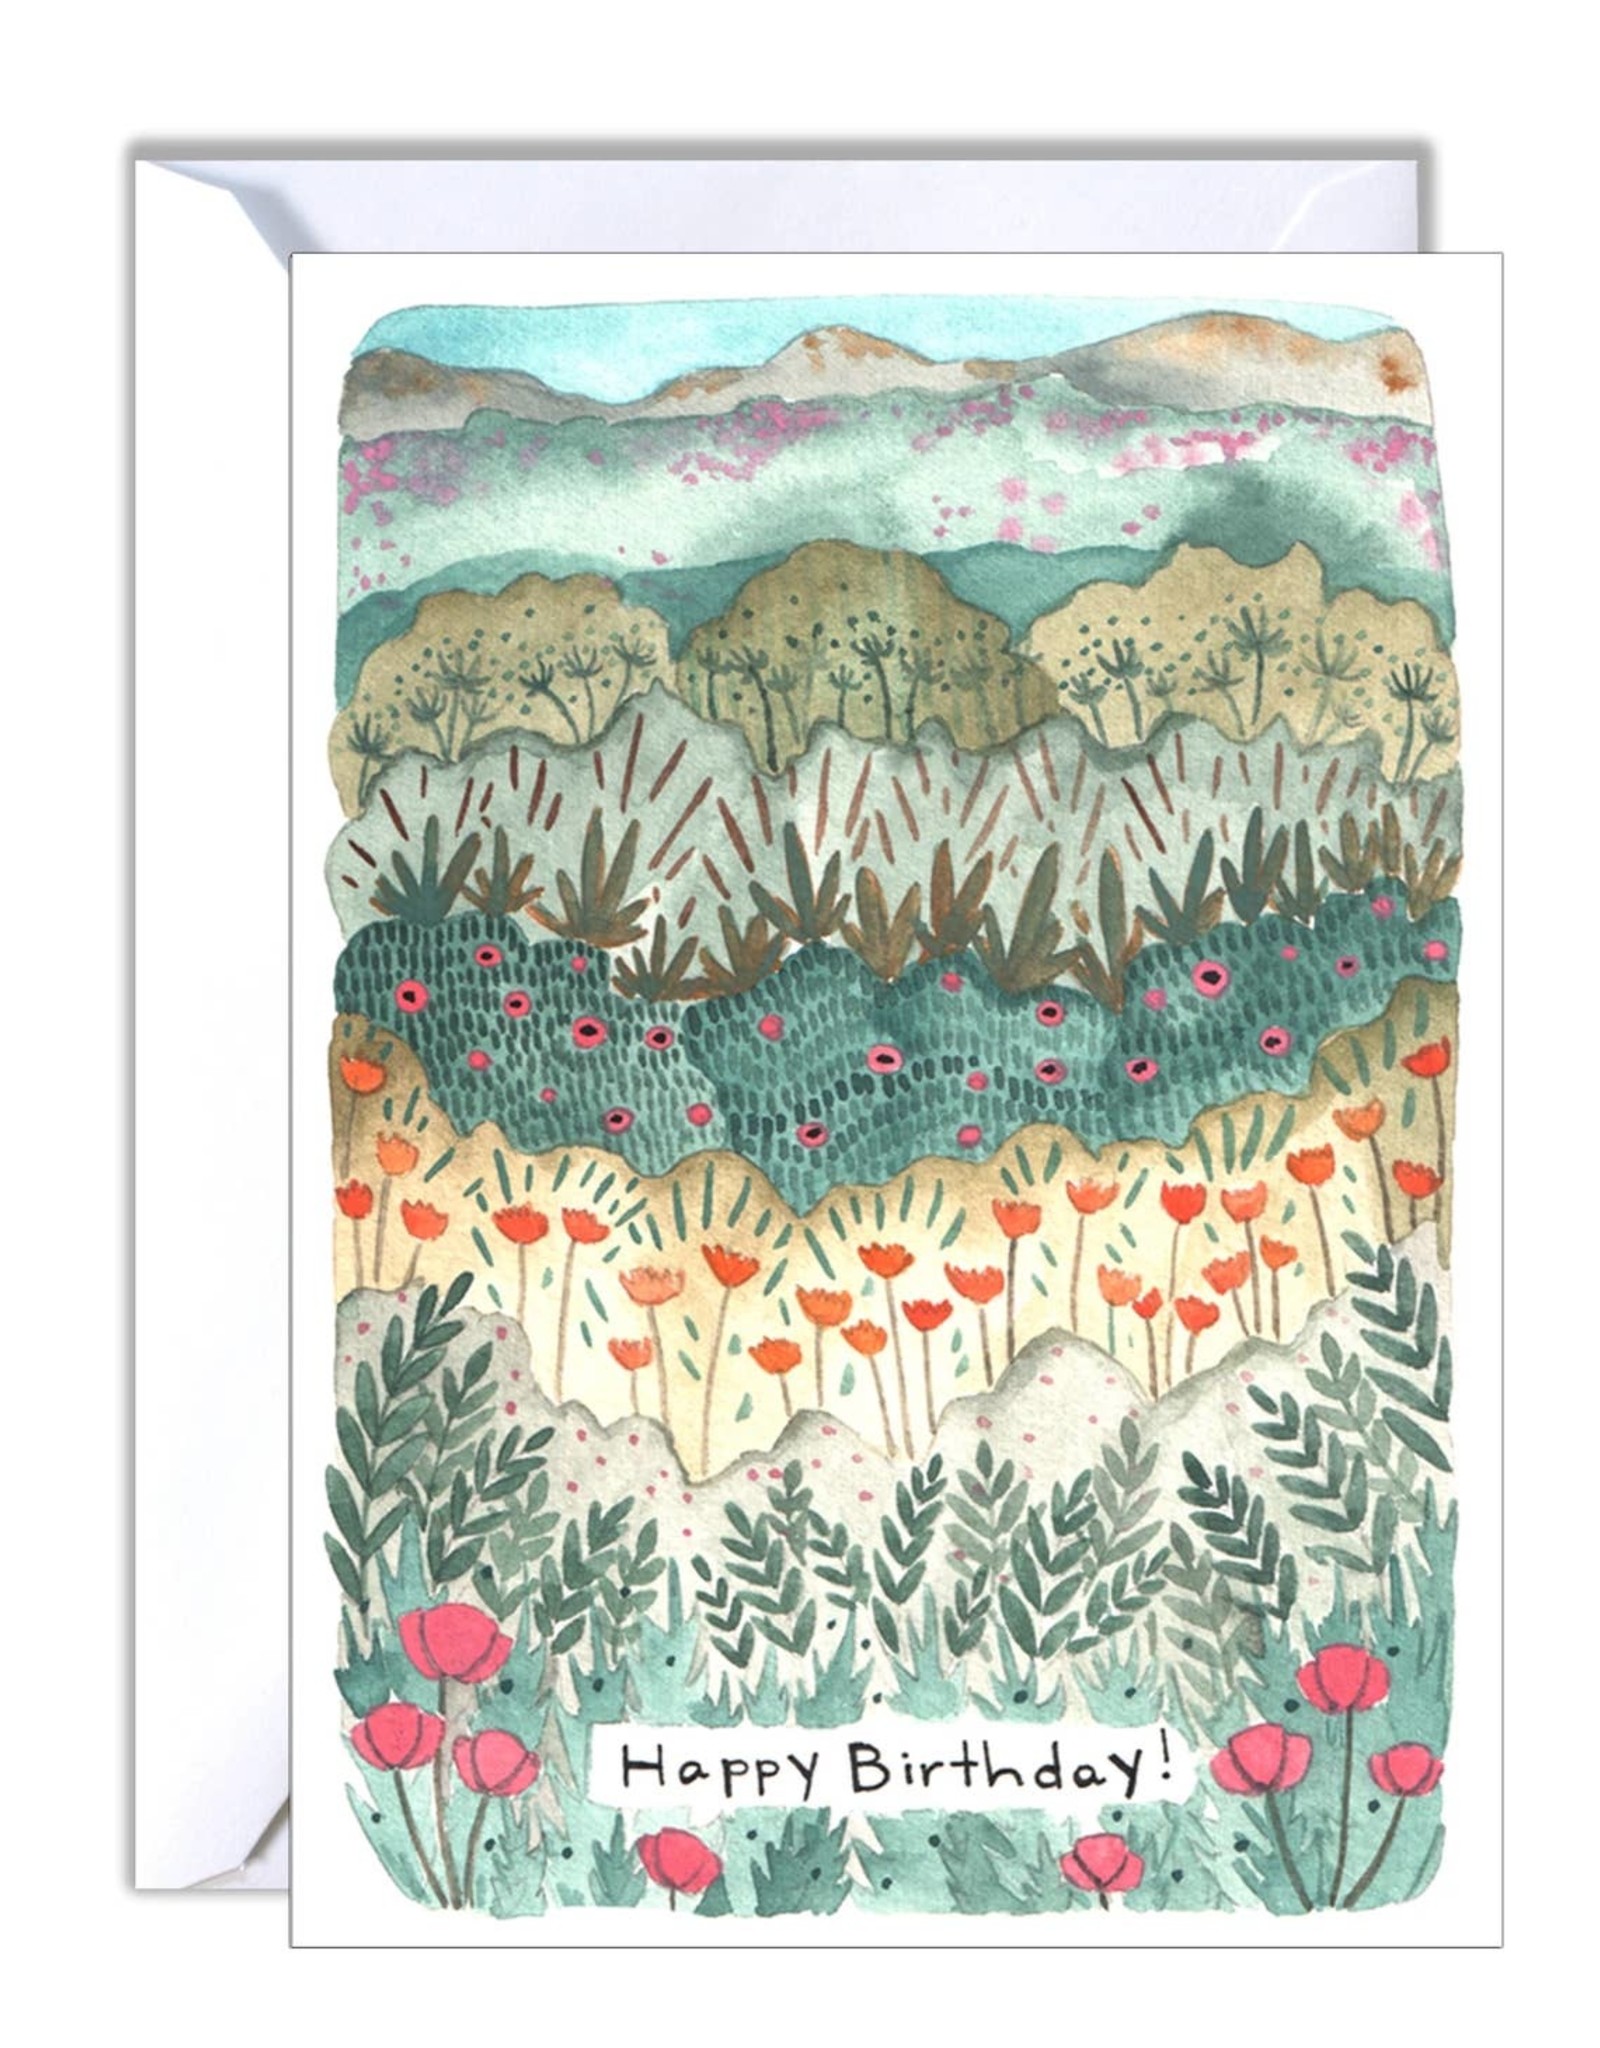 Michelle Maule - Floral Fields Birthday Card